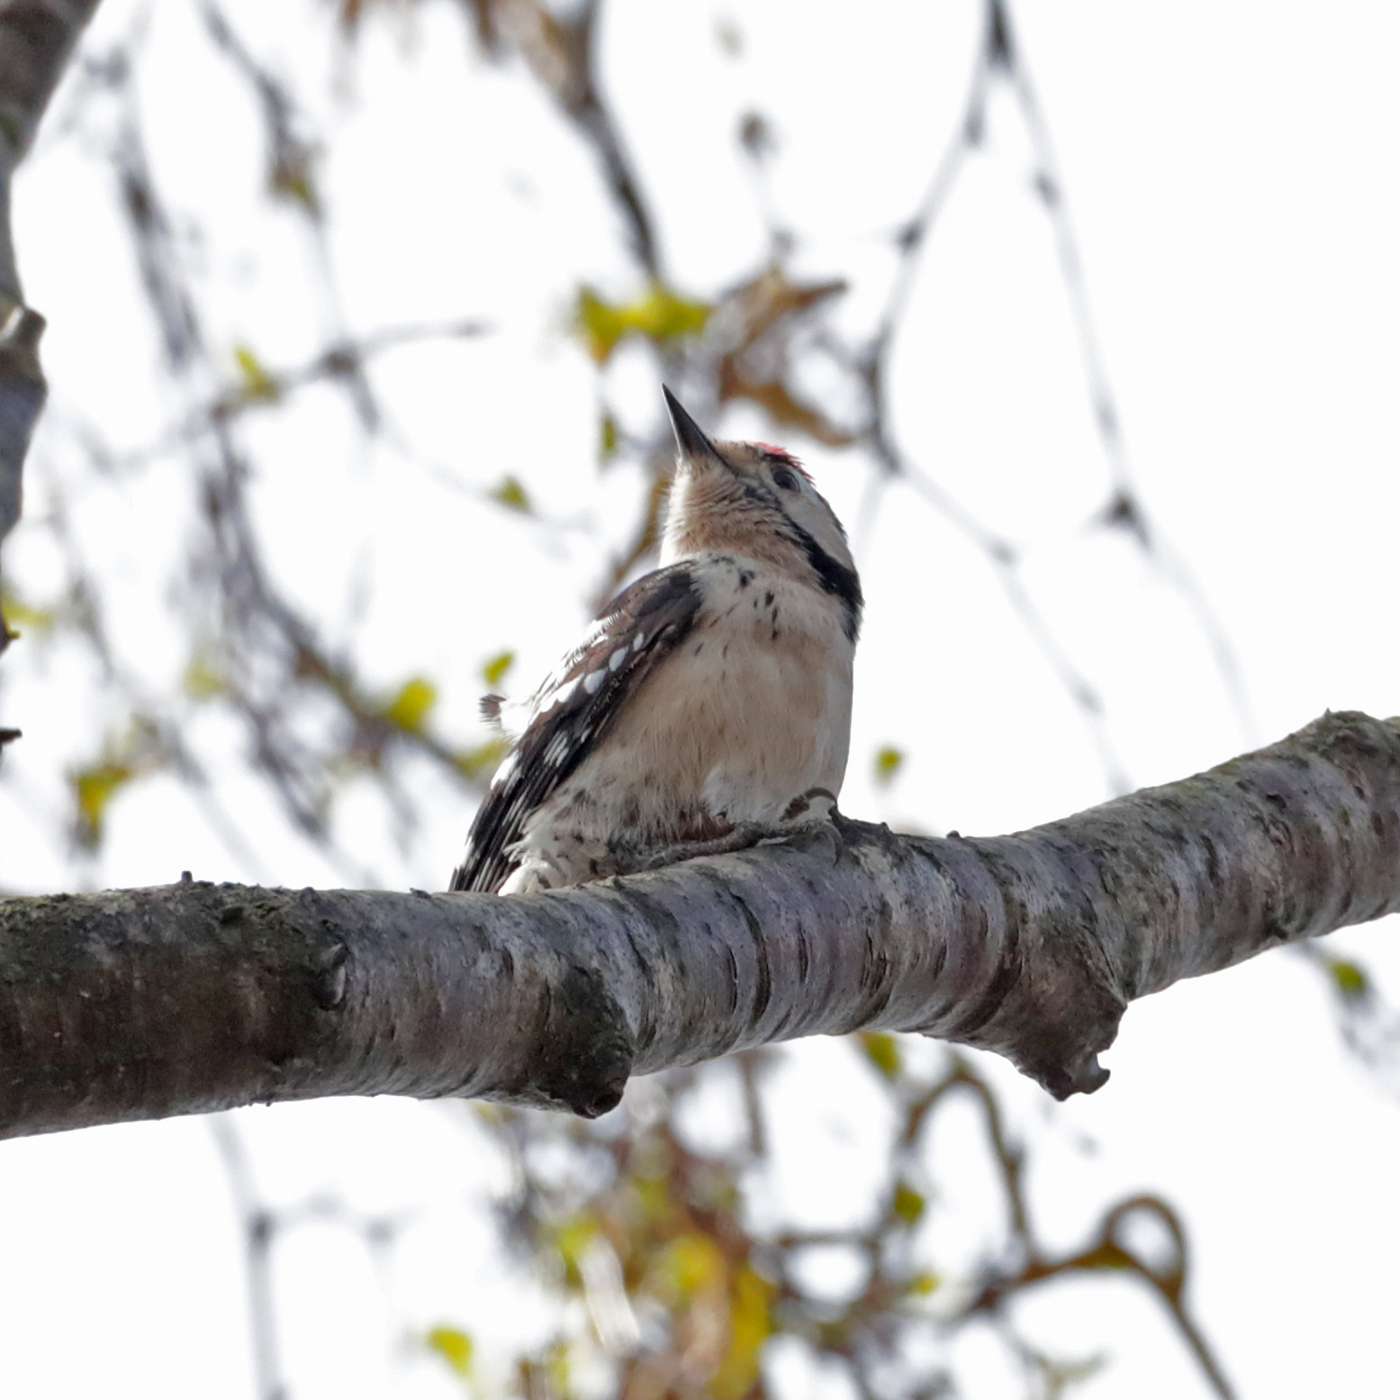 Lesser Spotted Woodpecker by Steve Hopper at Dartmoor